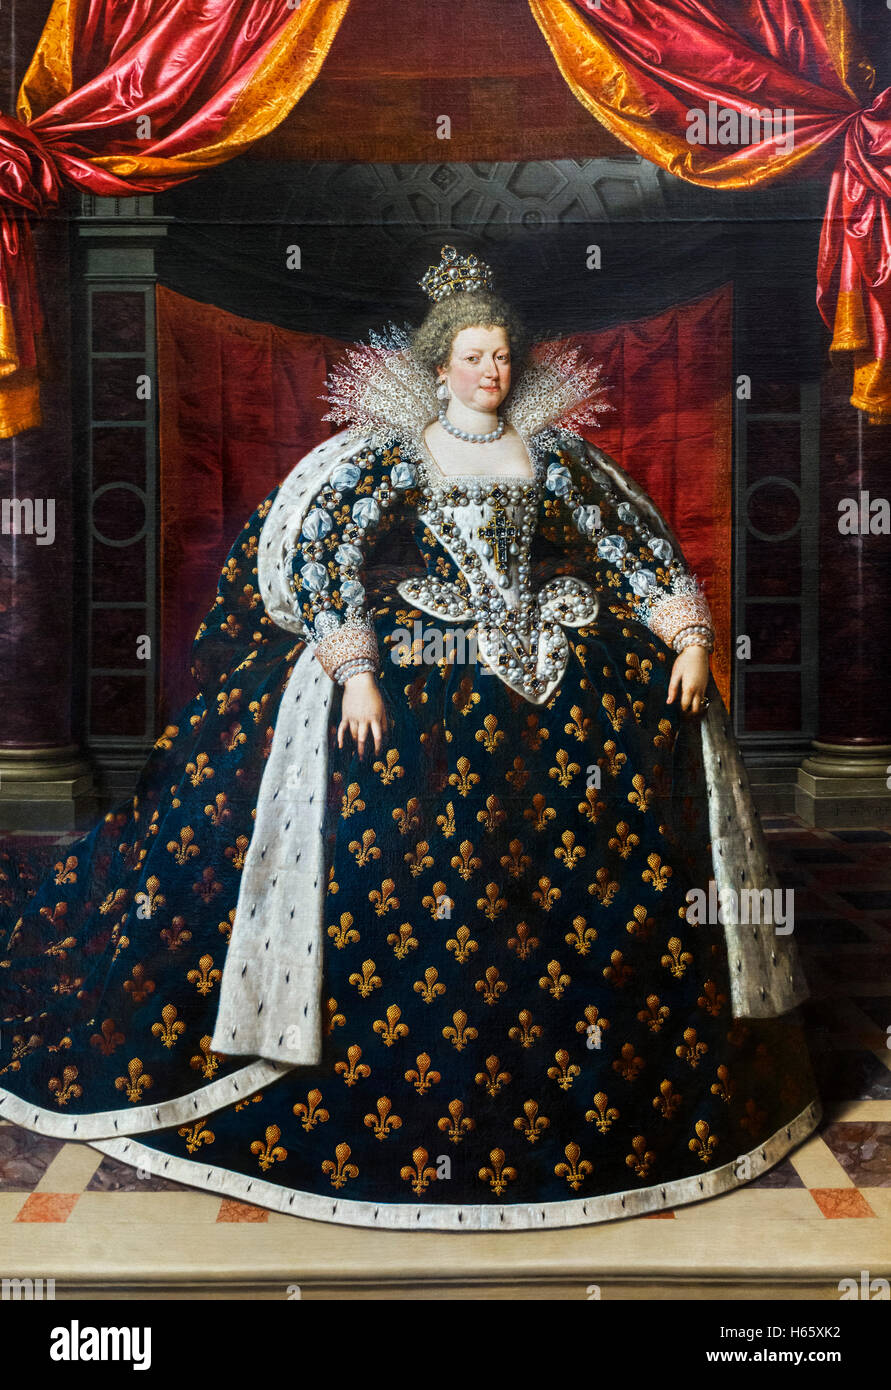 Marie de' Medici (Marie de Médicis: 1575-1642) was Queen of France as the second wife of King Henry IV of France. Portrait c.1609-10 by Franz Pourbus the Younger Stock Photo